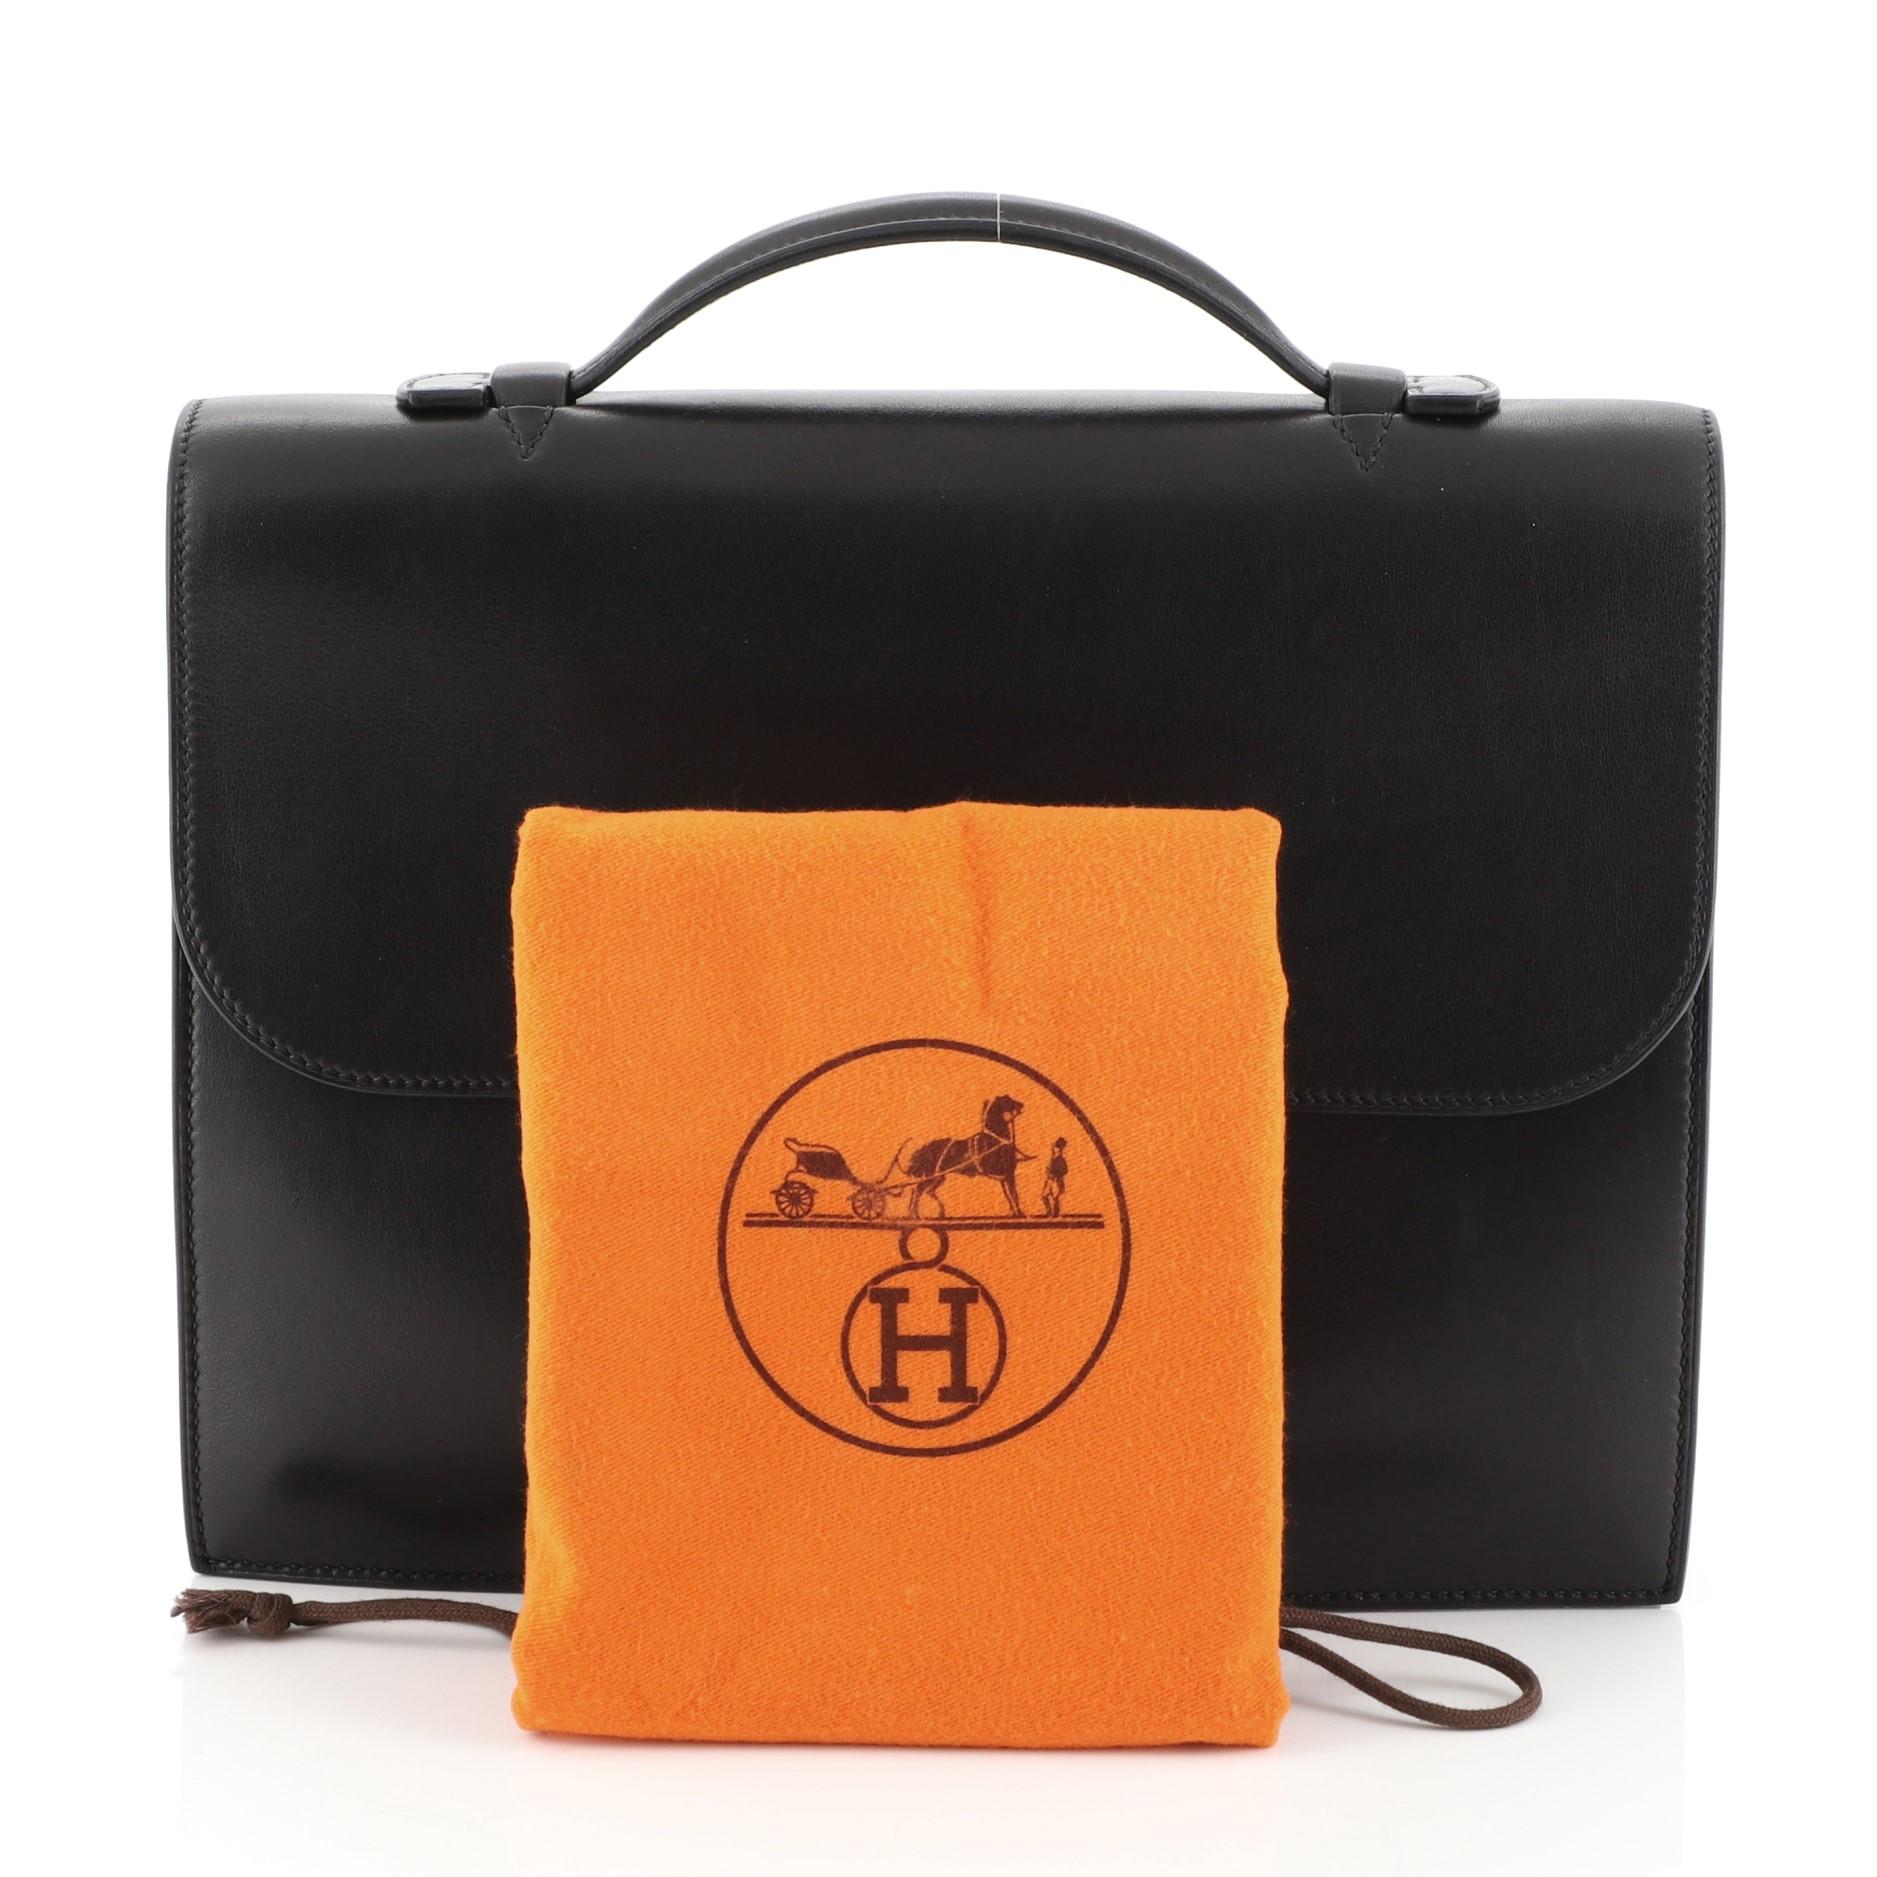 This Hermes Sac a Depeches Bag Swift 27, crafted from Noir black Swift leather, features flat top handle, accordion side gussets, and palladium hardware. Its flip-lock closure opens to a Noir black raw leather interior. Date stamp reads: I Square